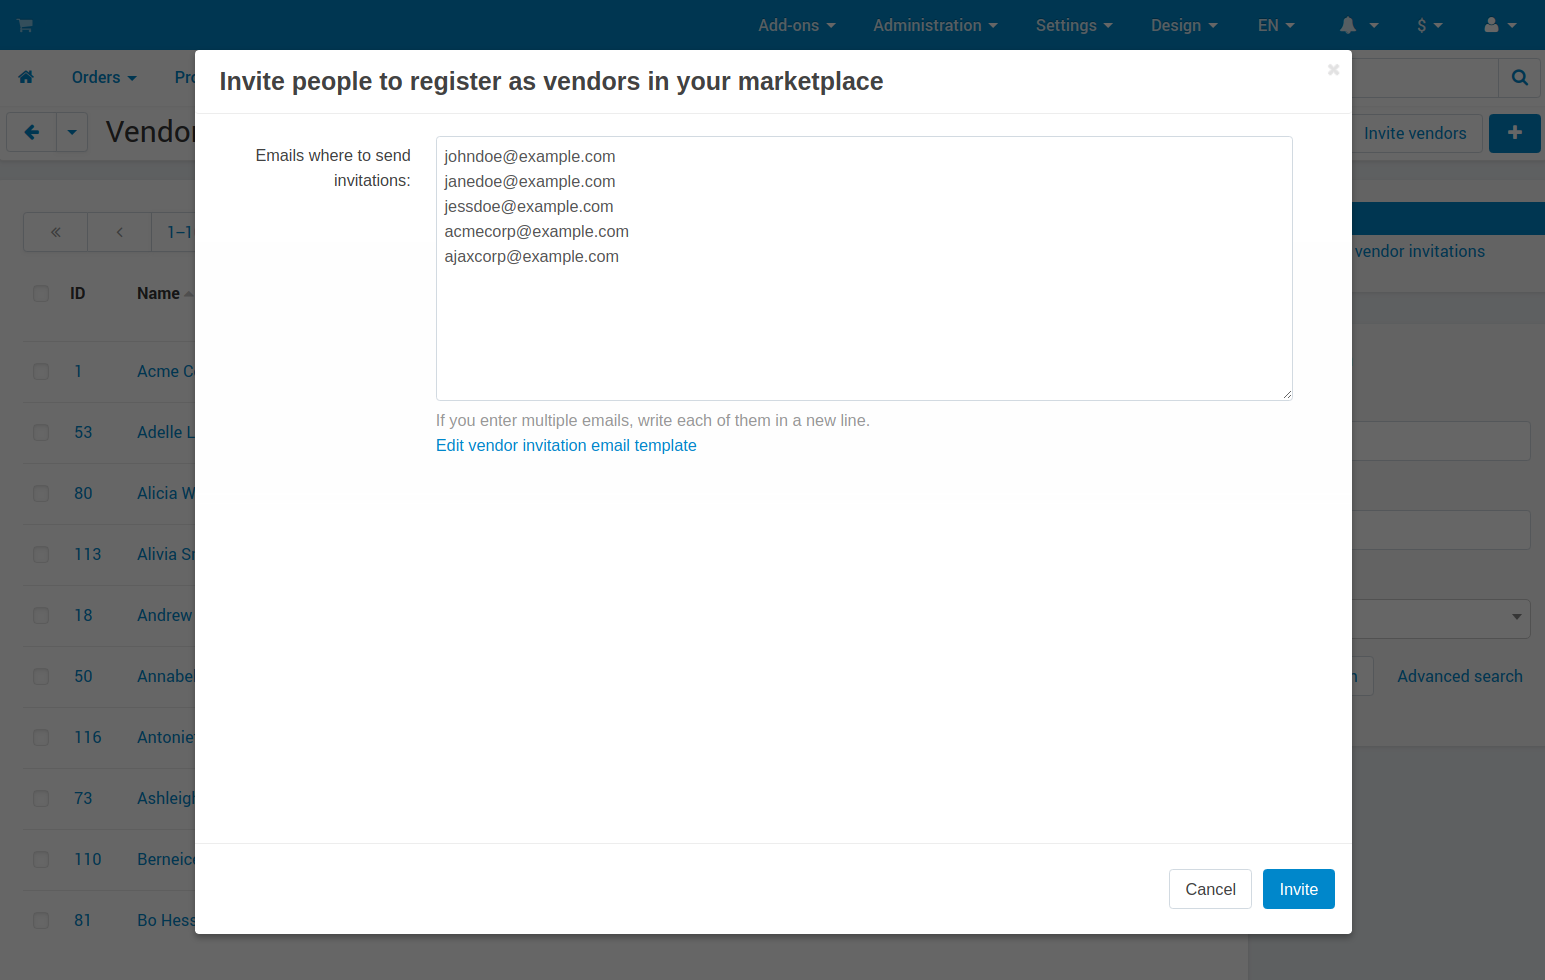 Vendor invitation window in Multi-Vendor lets you enter one or multiple email addresses for sending the invitations to.